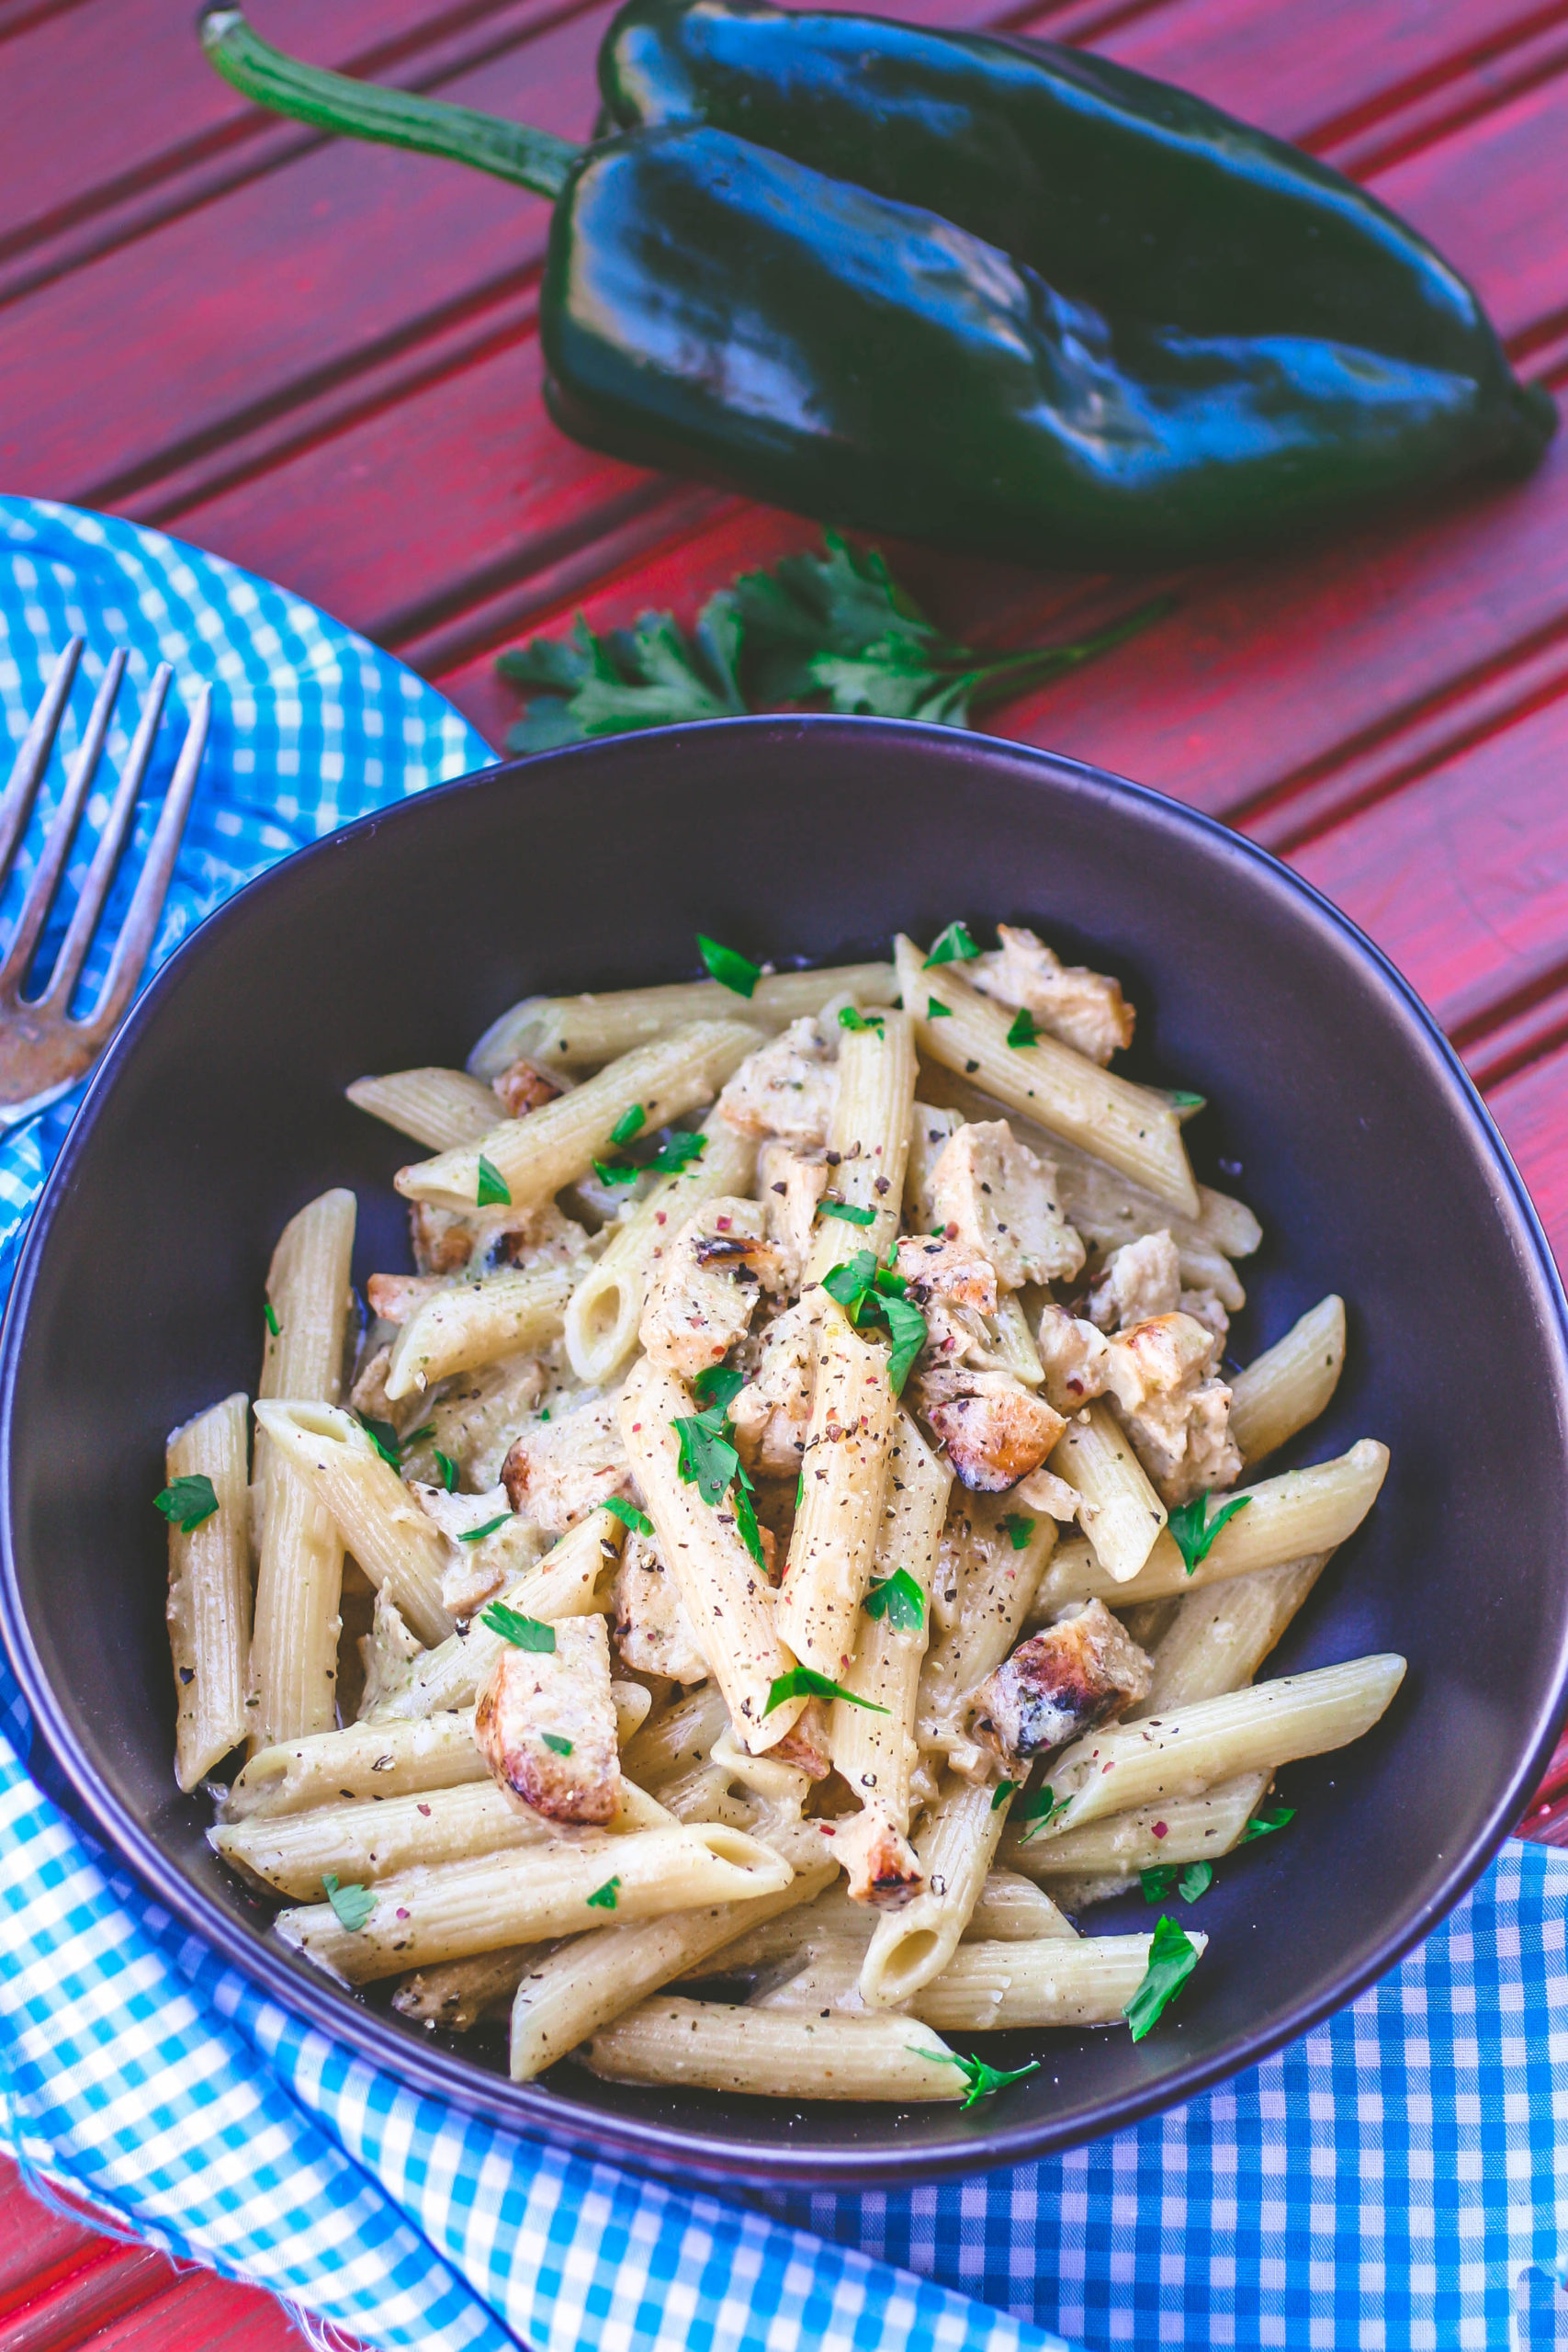 You'll love Pasta with Chicken in Creamy Poblano Sauce for your next meal!